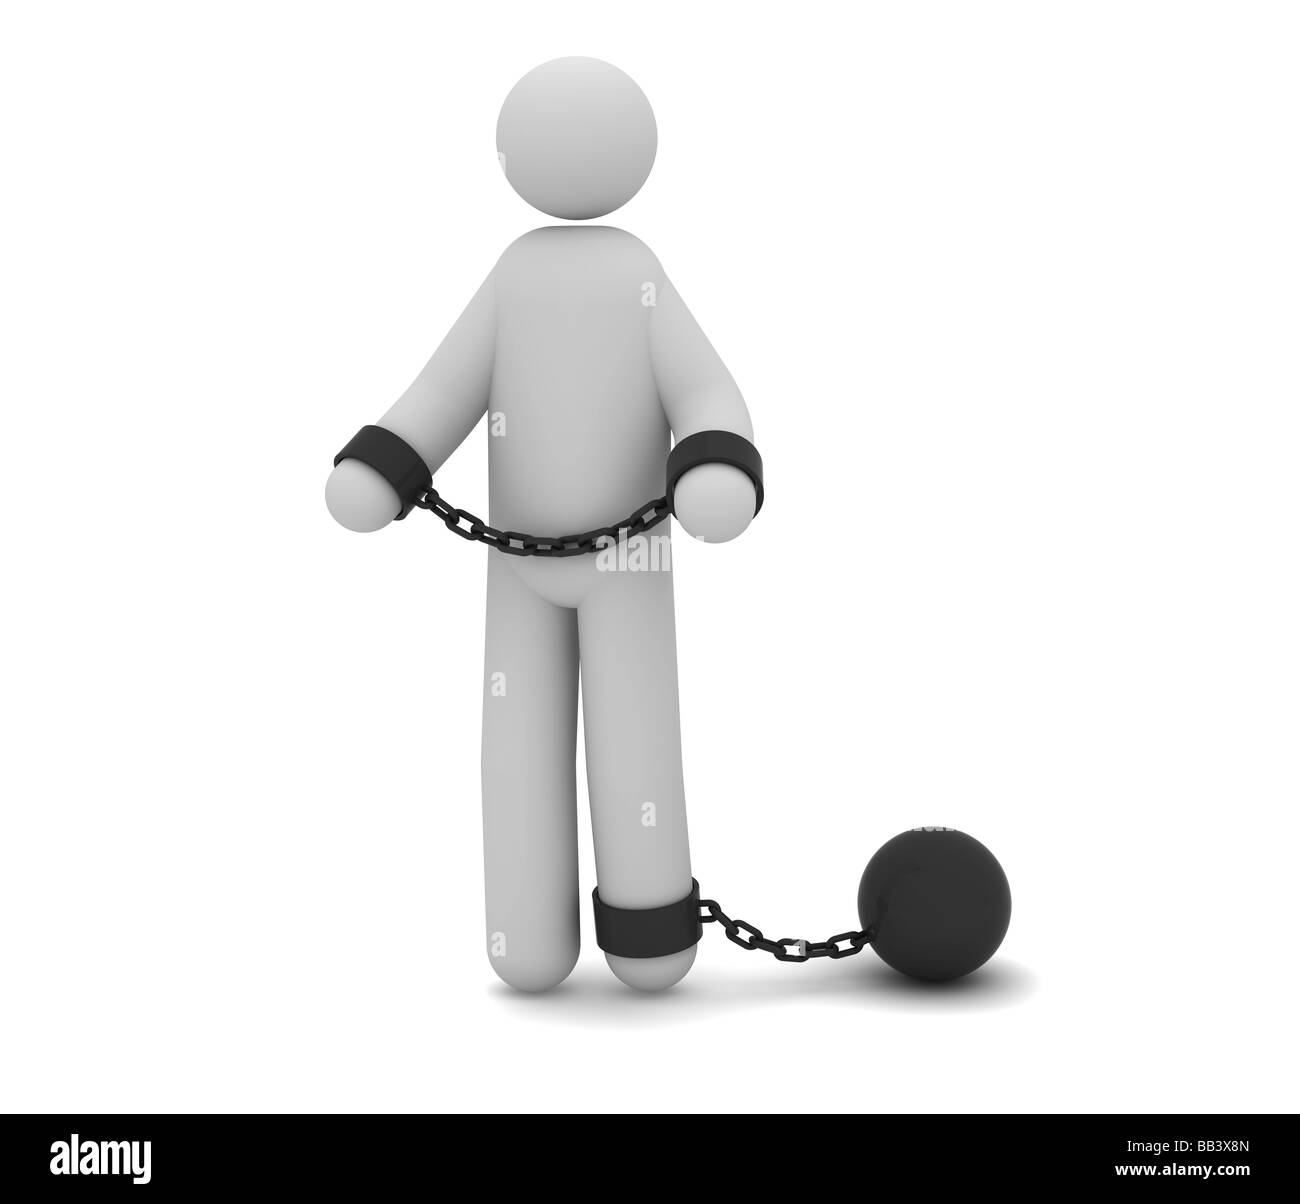 Man arrested with prison ball and chain Stock Photo - Alamy